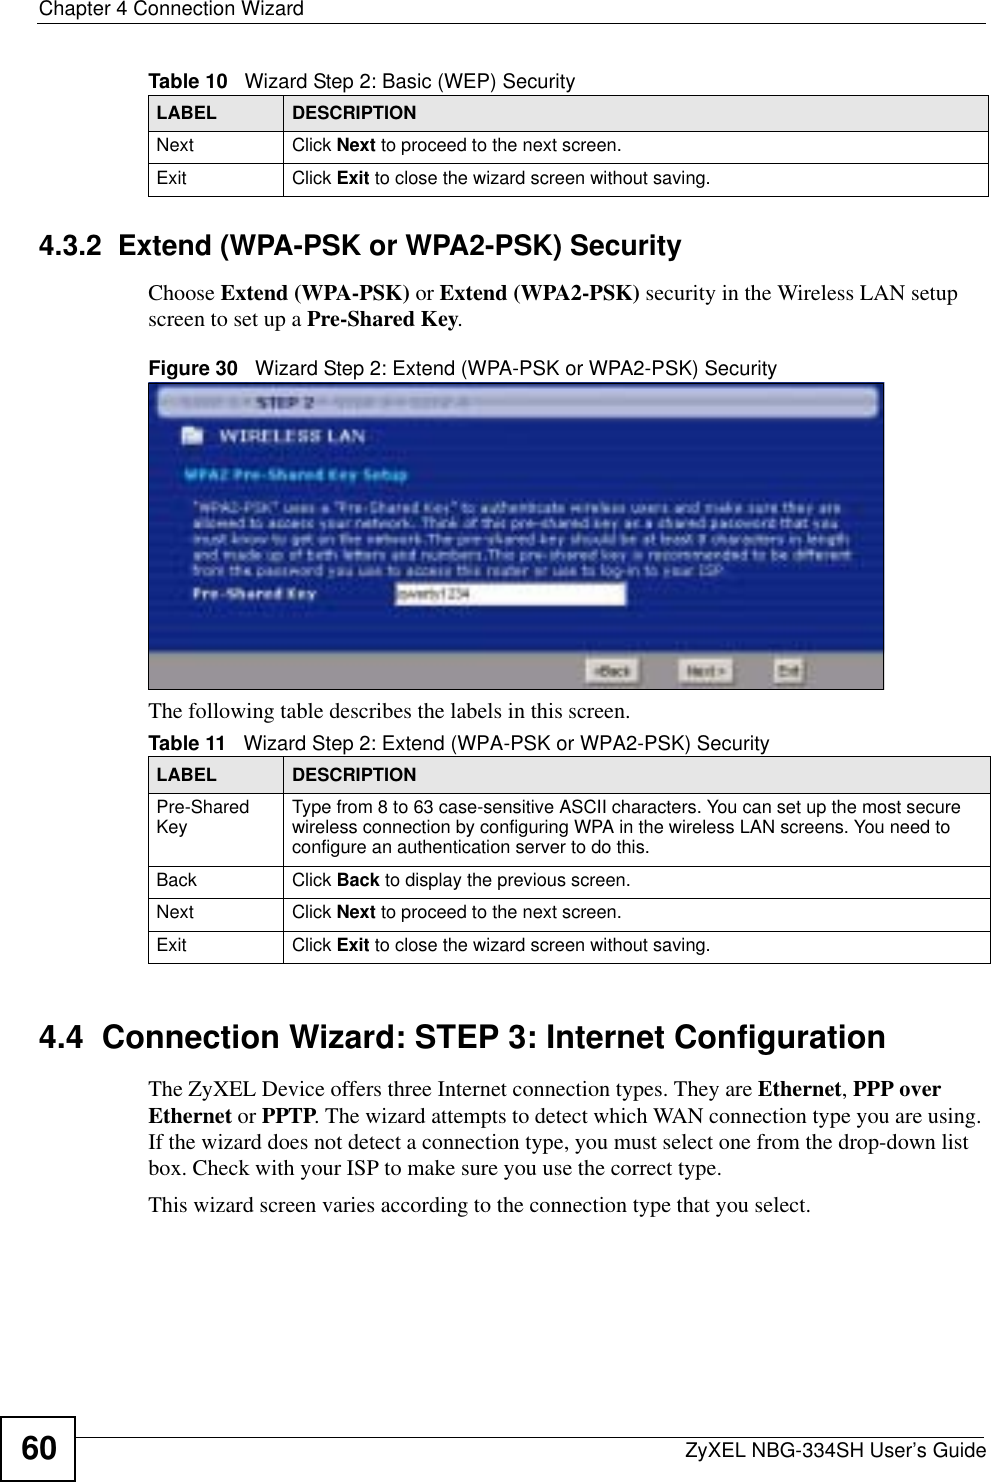 Chapter 4 Connection WizardZyXEL NBG-334SH User’s Guide604.3.2  Extend (WPA-PSK or WPA2-PSK) SecurityChoose Extend (WPA-PSK) or Extend (WPA2-PSK) security in the Wireless LAN setup screen to set up a Pre-Shared Key.Figure 30   Wizard Step 2: Extend (WPA-PSK or WPA2-PSK) SecurityThe following table describes the labels in this screen. 4.4  Connection Wizard: STEP 3: Internet ConfigurationThe ZyXEL Device offers three Internet connection types. They are Ethernet,PPP over Ethernet or PPTP. The wizard attempts to detect which WAN connection type you are using. If the wizard does not detect a connection type, you must select one from the drop-down list box. Check with your ISP to make sure you use the correct type.This wizard screen varies according to the connection type that you select.Next Click Next to proceed to the next screen. Exit Click Exit to close the wizard screen without saving.Table 10   Wizard Step 2: Basic (WEP) SecurityLABEL DESCRIPTIONTable 11   Wizard Step 2: Extend (WPA-PSK or WPA2-PSK) SecurityLABEL DESCRIPTIONPre-Shared Key Type from 8 to 63 case-sensitive ASCII characters. You can set up the most secure wireless connection by configuring WPA in the wireless LAN screens. You need to configure an authentication server to do this.Back Click Back to display the previous screen.Next Click Next to proceed to the next screen. Exit Click Exit to close the wizard screen without saving.